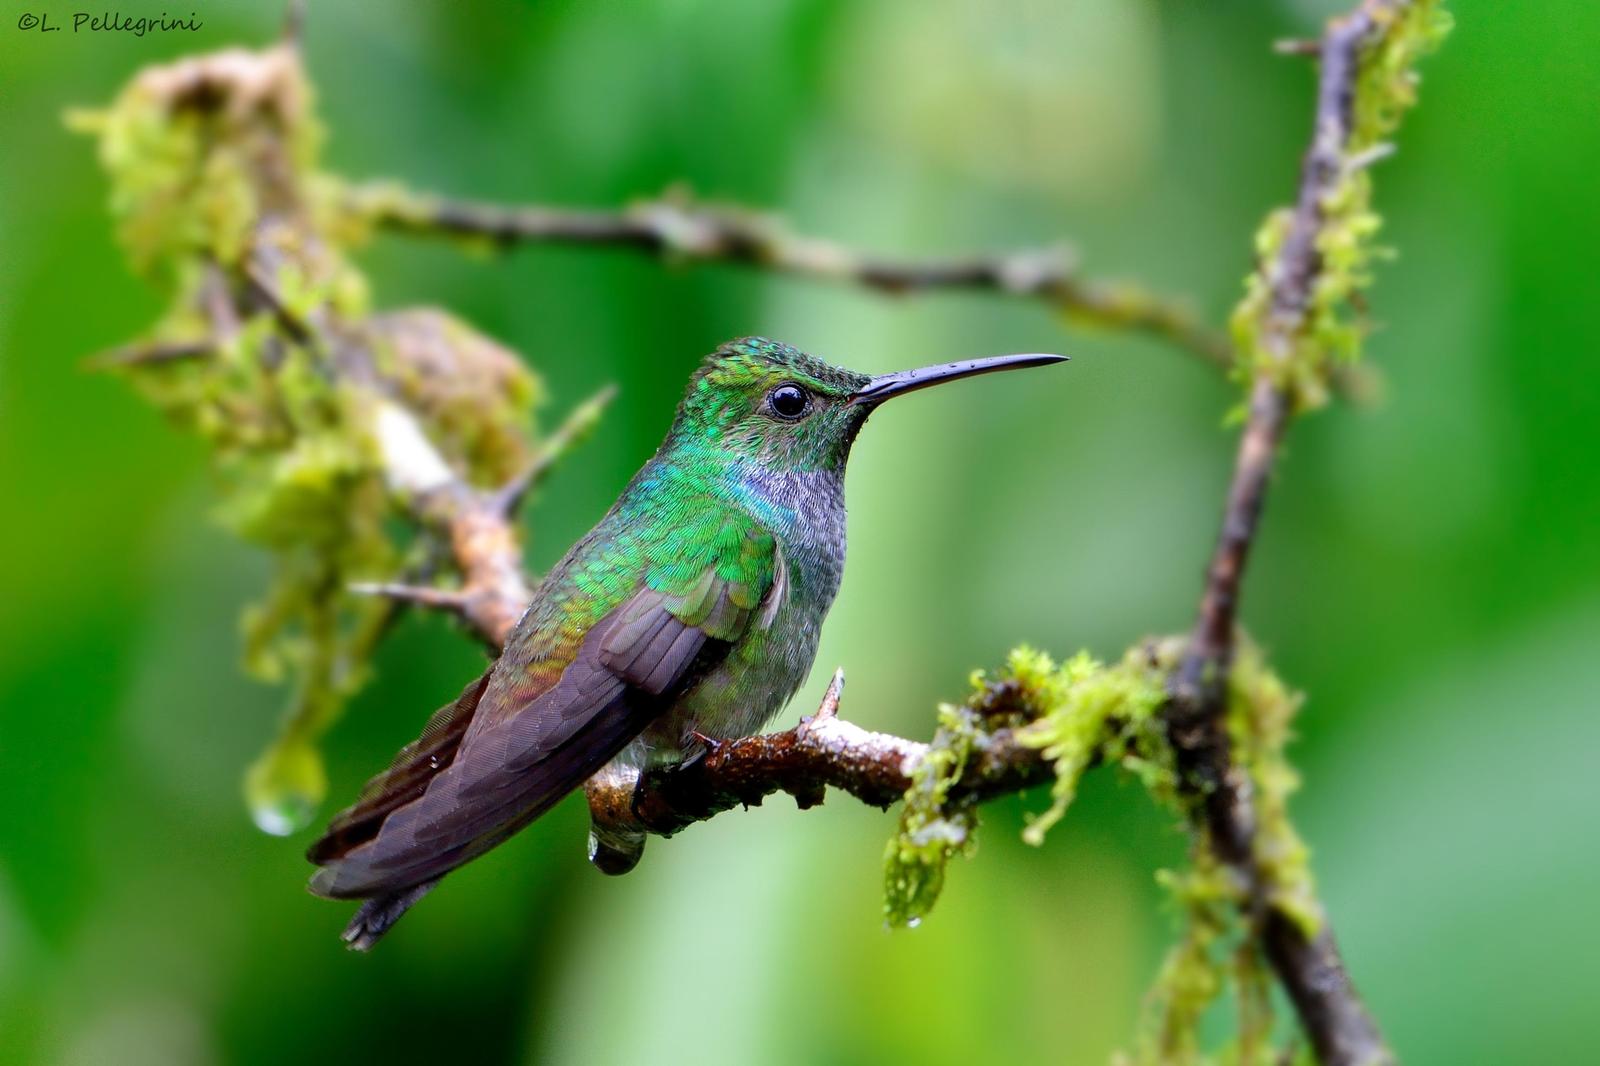 Blue-chested Hummingbird Photo by Laurence Pellegrini